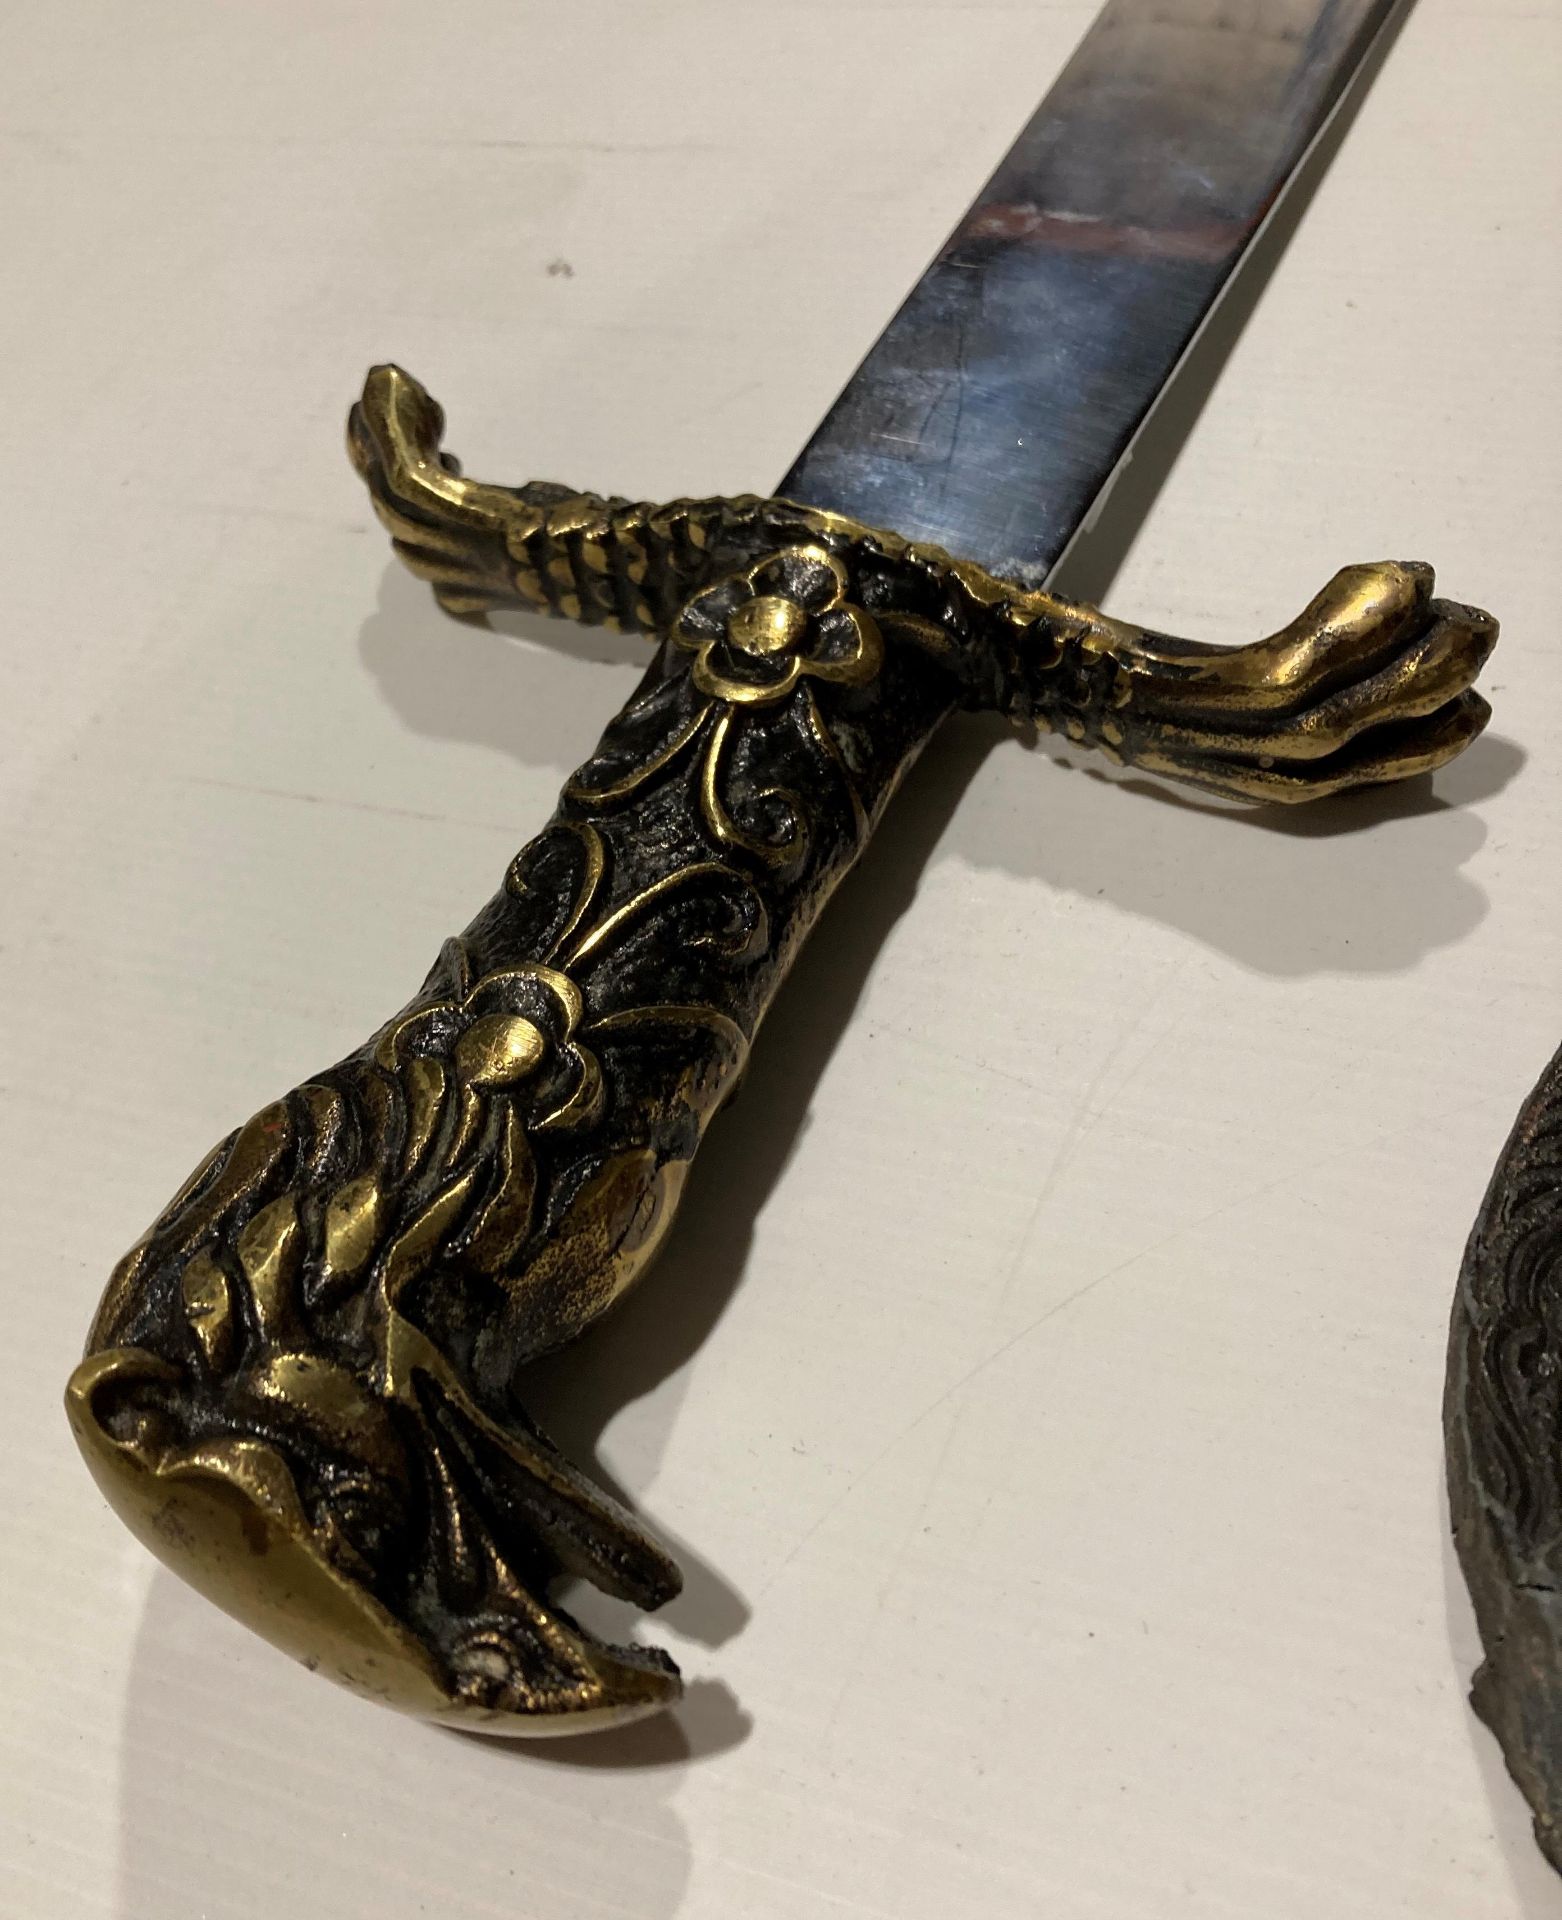 A reproduction steel sword with eagle/dragon head handle (61cm blade) and decorative sword with - Image 2 of 4